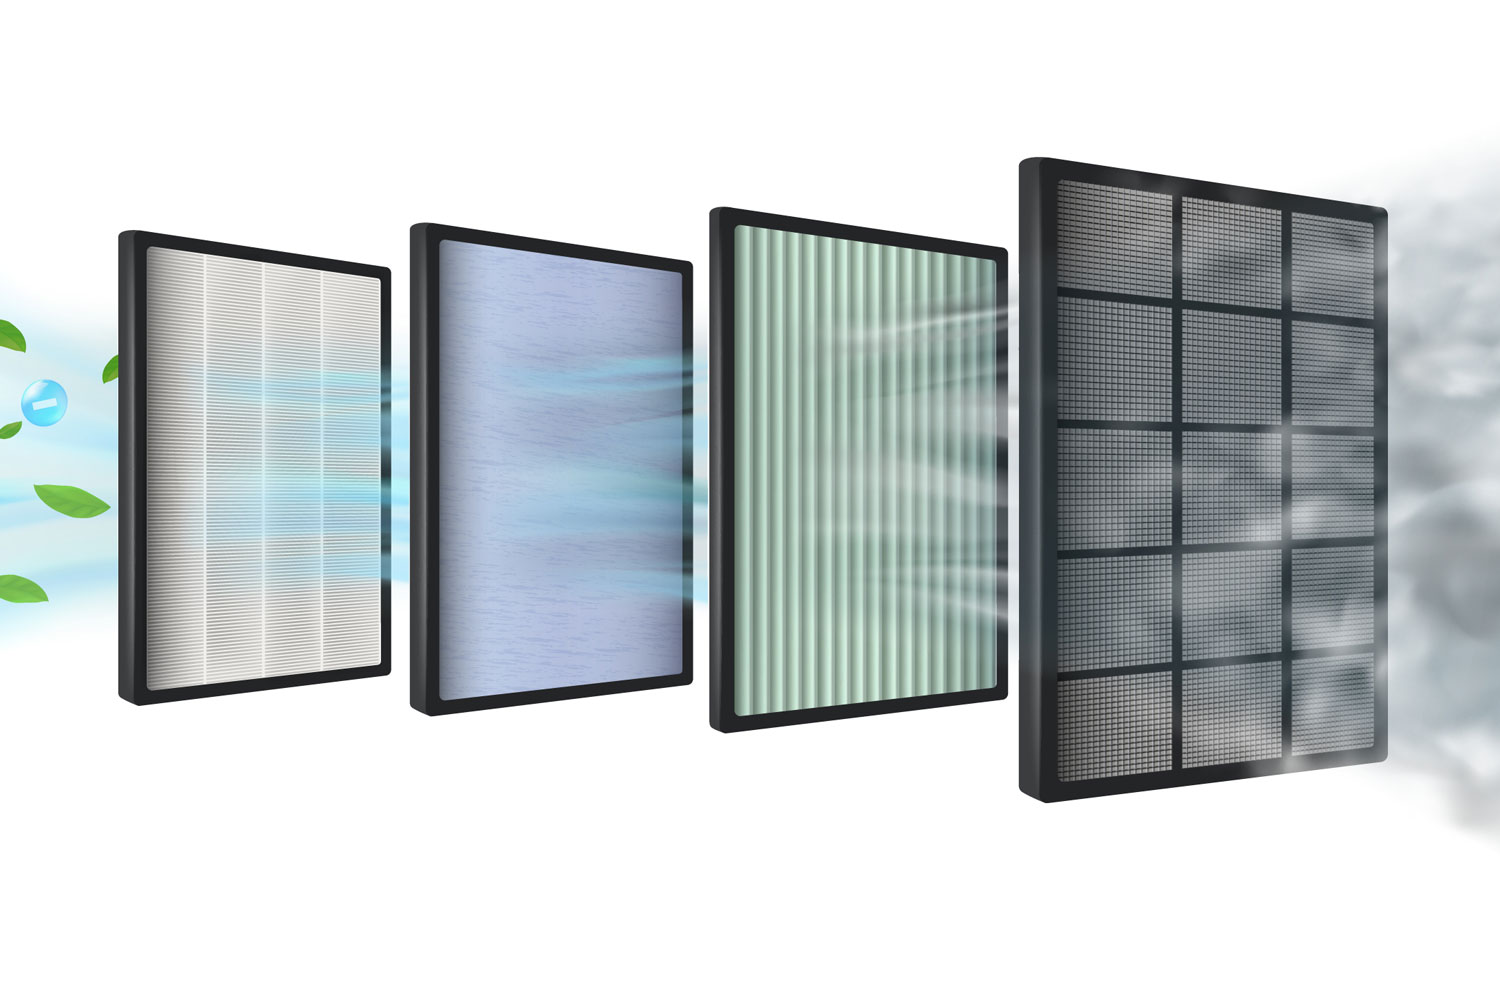 New multi-layer air filter efficiency technology consists of multiple filter layers